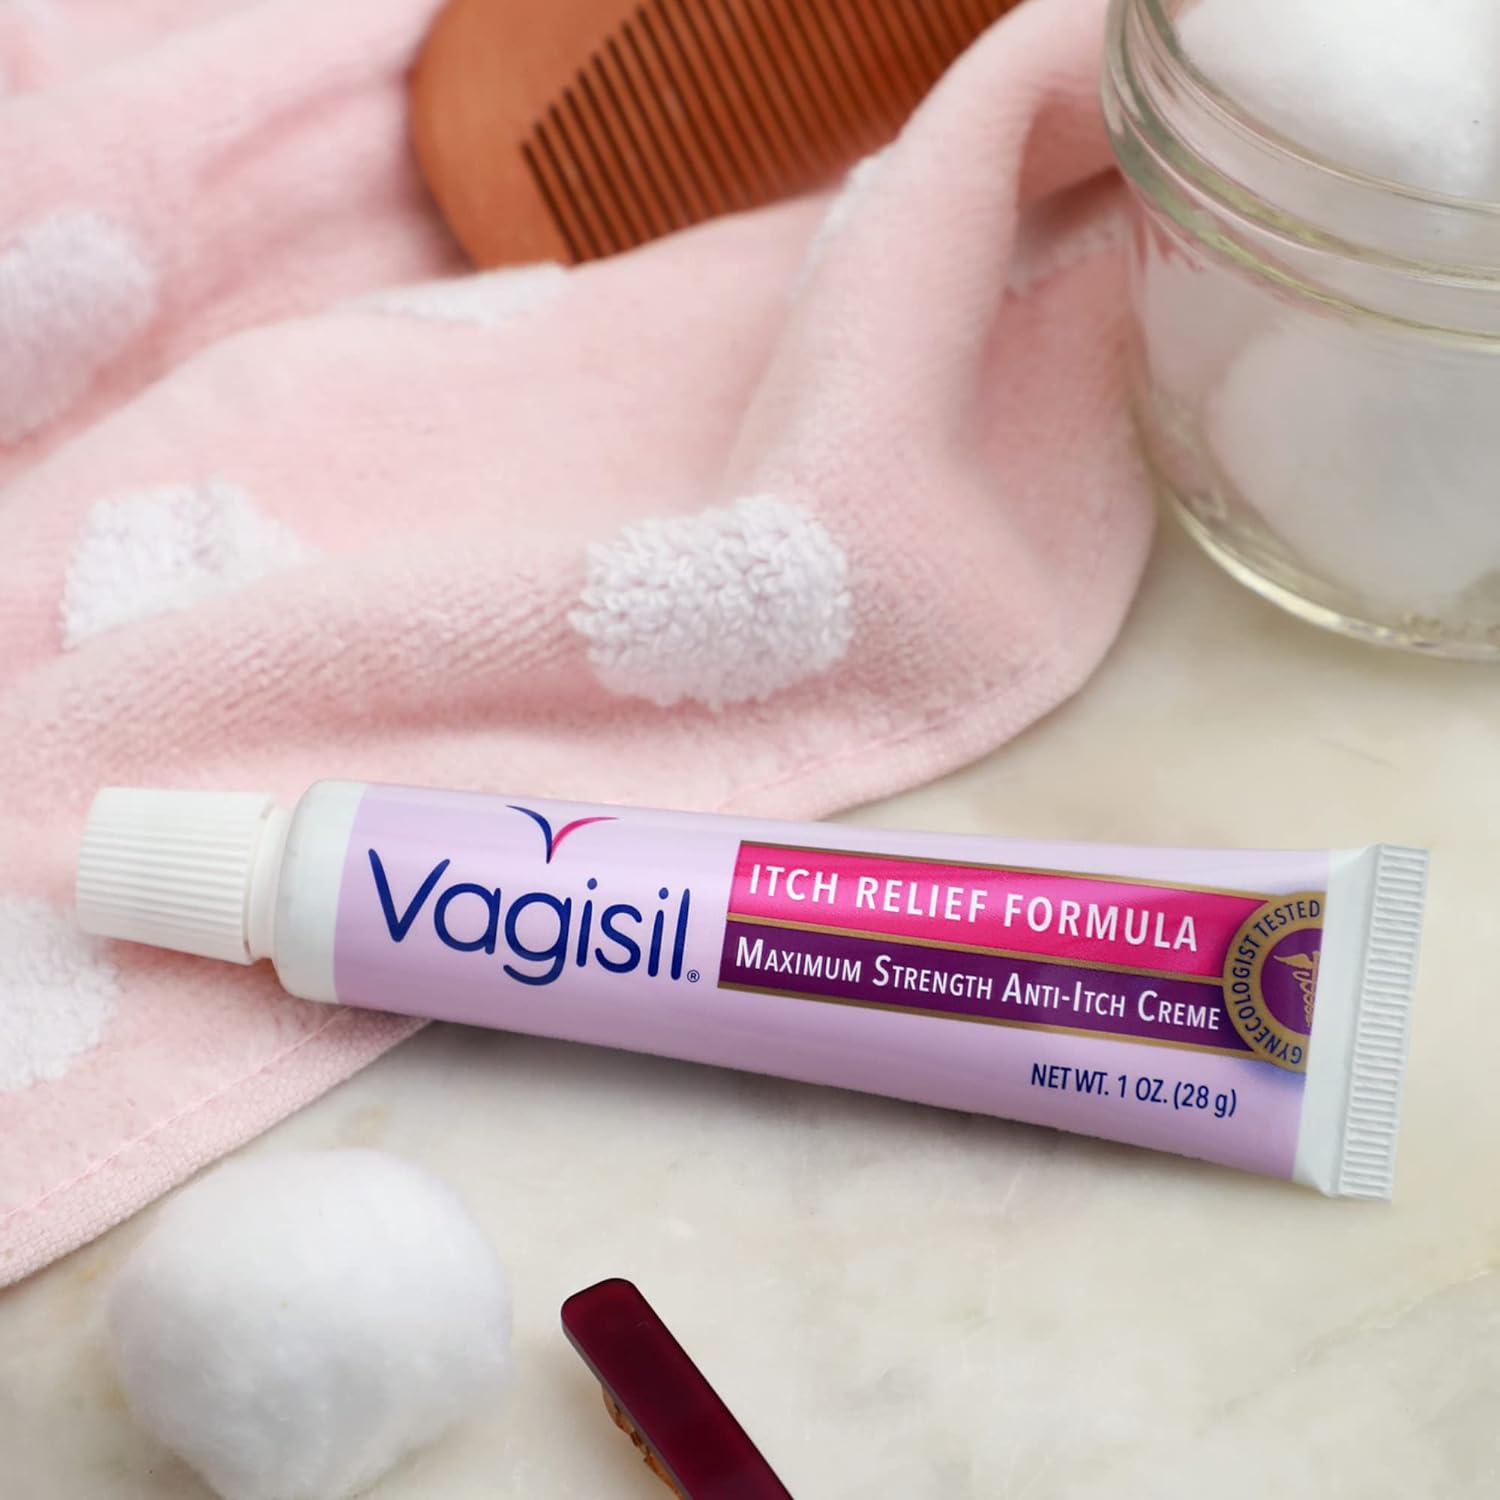 Vagisil Maximum Strength Feminine Anti-Itch Cream with Benzocaine for Women, Helps Relieve Yeast Infection Irritation, Gynecologist Tested, Fast-acting, Soothes and Cools Skin, 1 oz : Health & Household